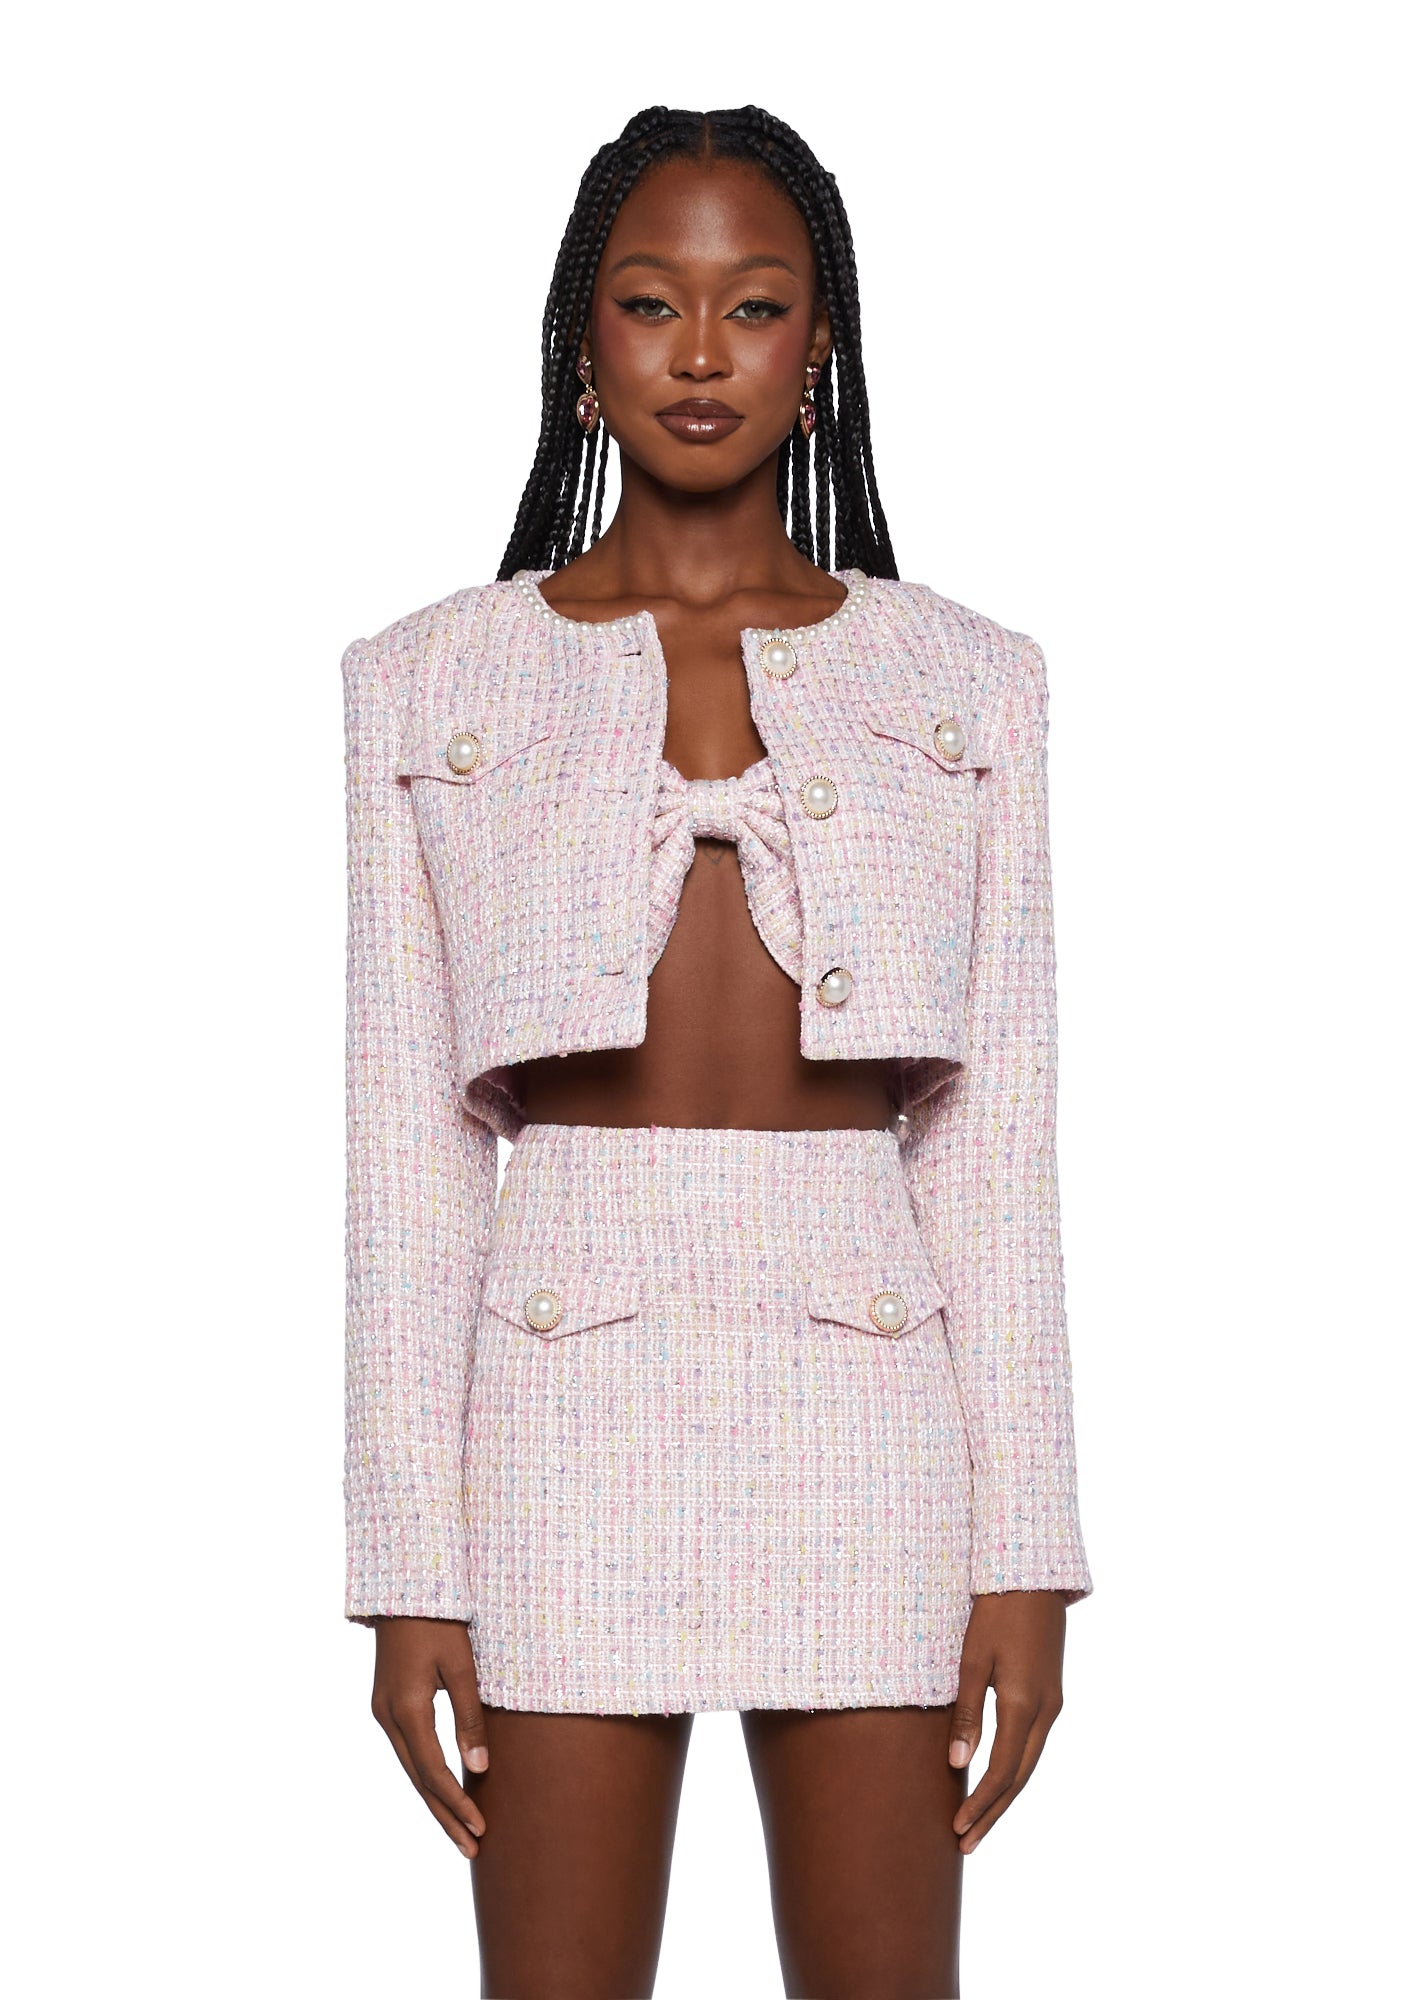 Chanel Tweed Suit With Bows